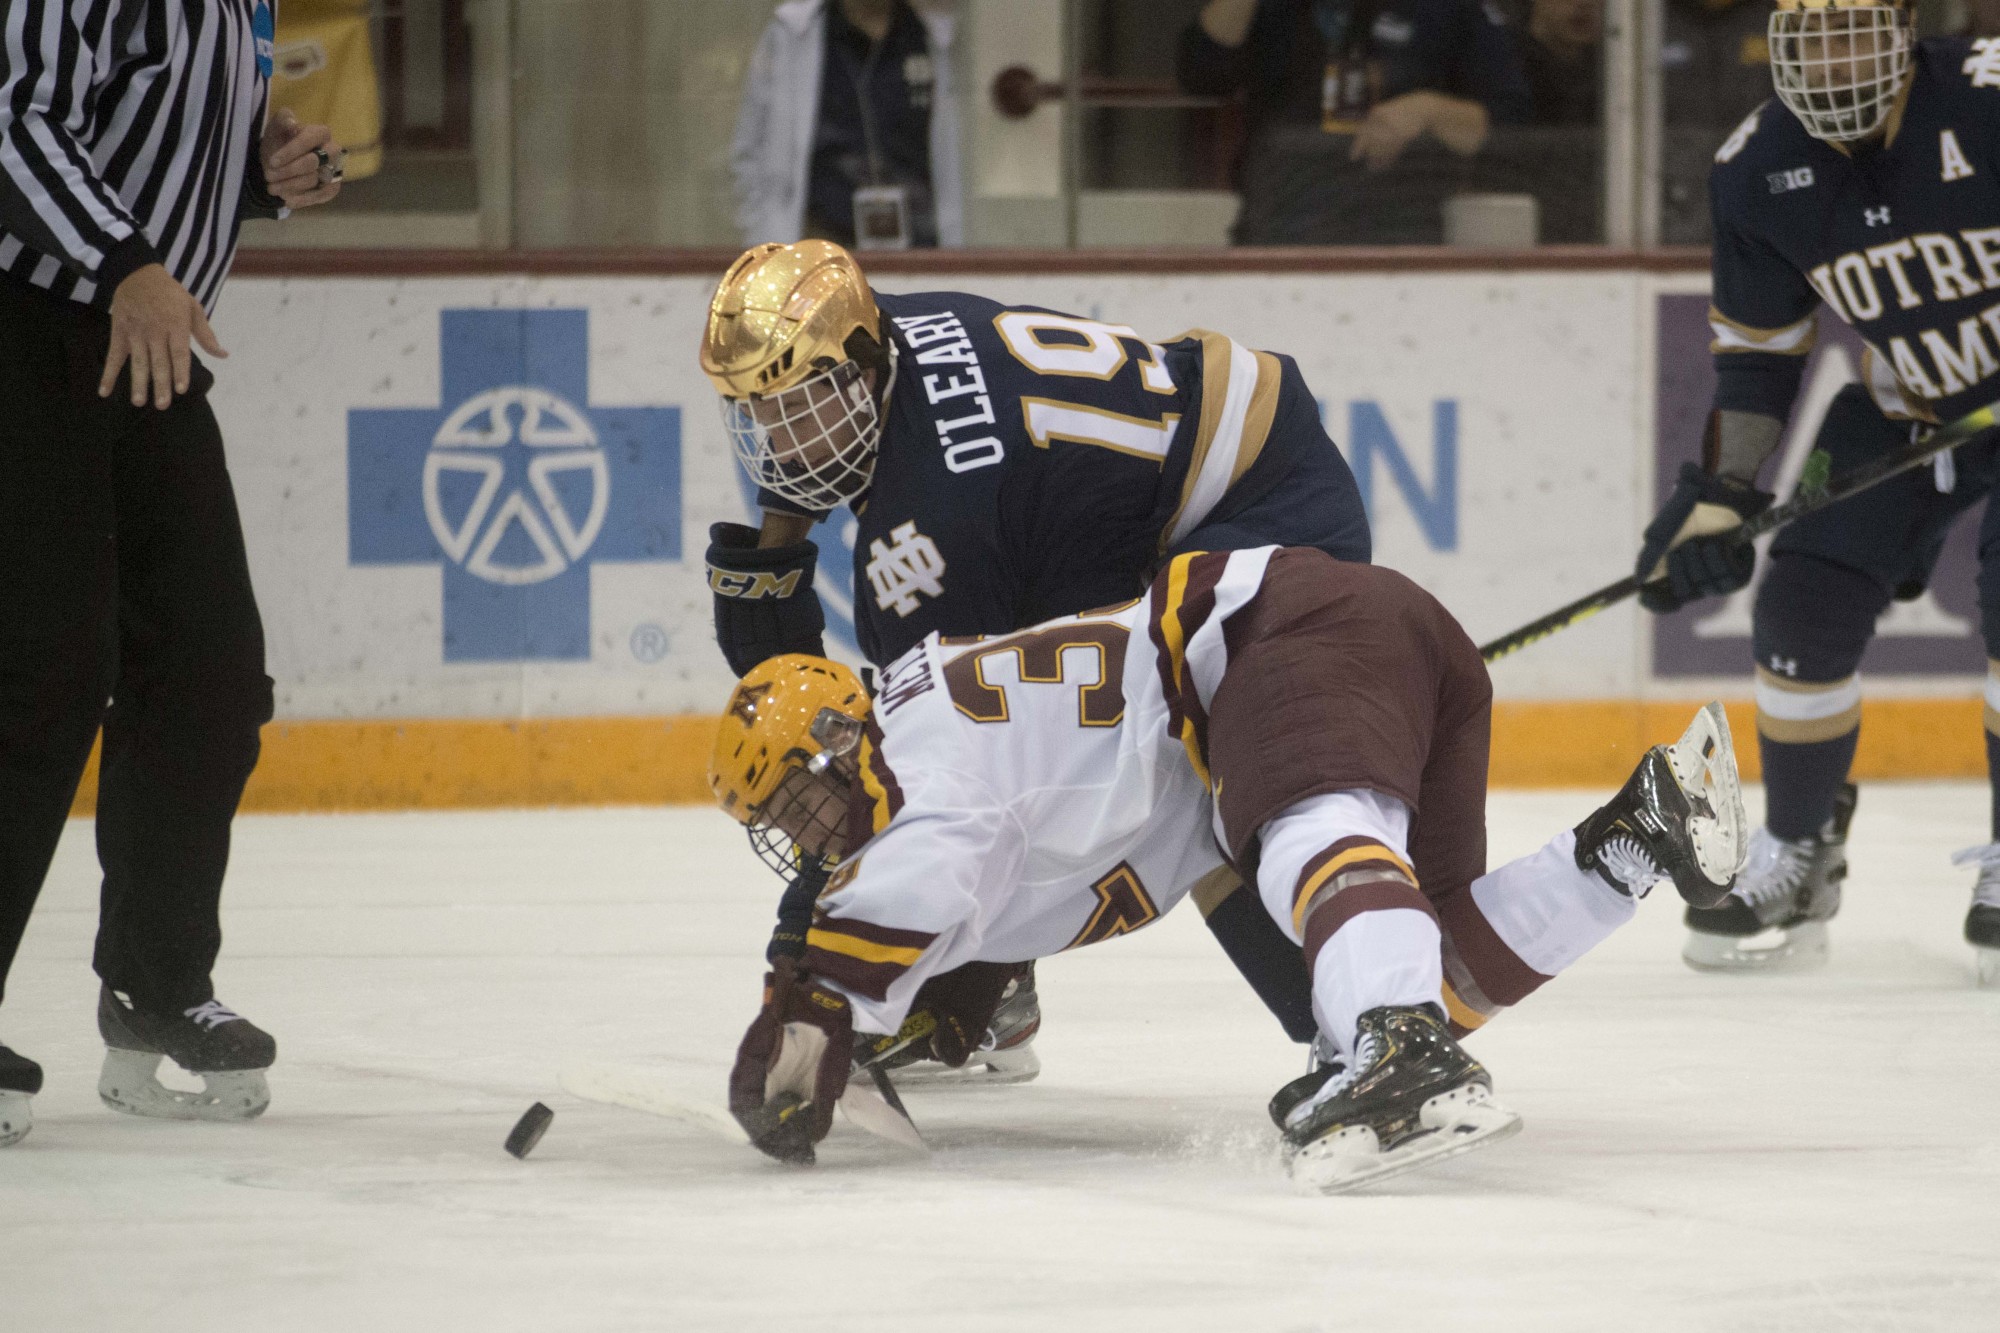 Forward Ben Meyers falls towads the puck during the game against the Notre Dame Fighting Irish at 3M Arena at Mariucci on Friday, Nov. 1. The Gophers won 3-2 in double overtime. 